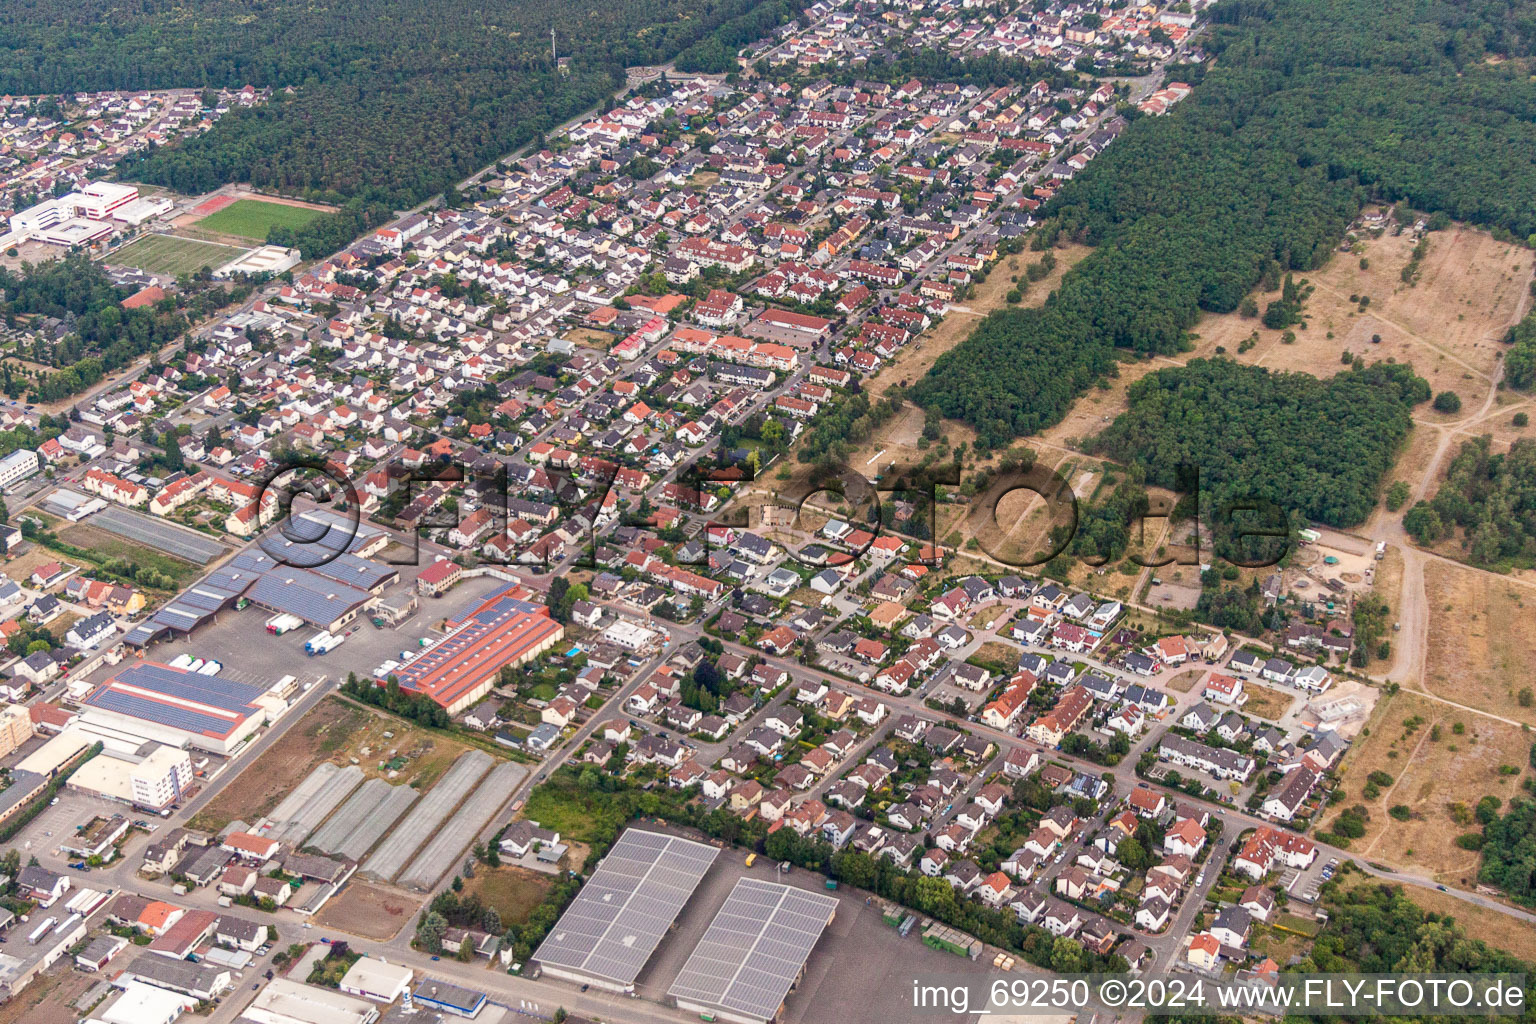 Aerial view of City area with outside districts and inner city area in Maxdorf in the state Rhineland-Palatinate, Germany